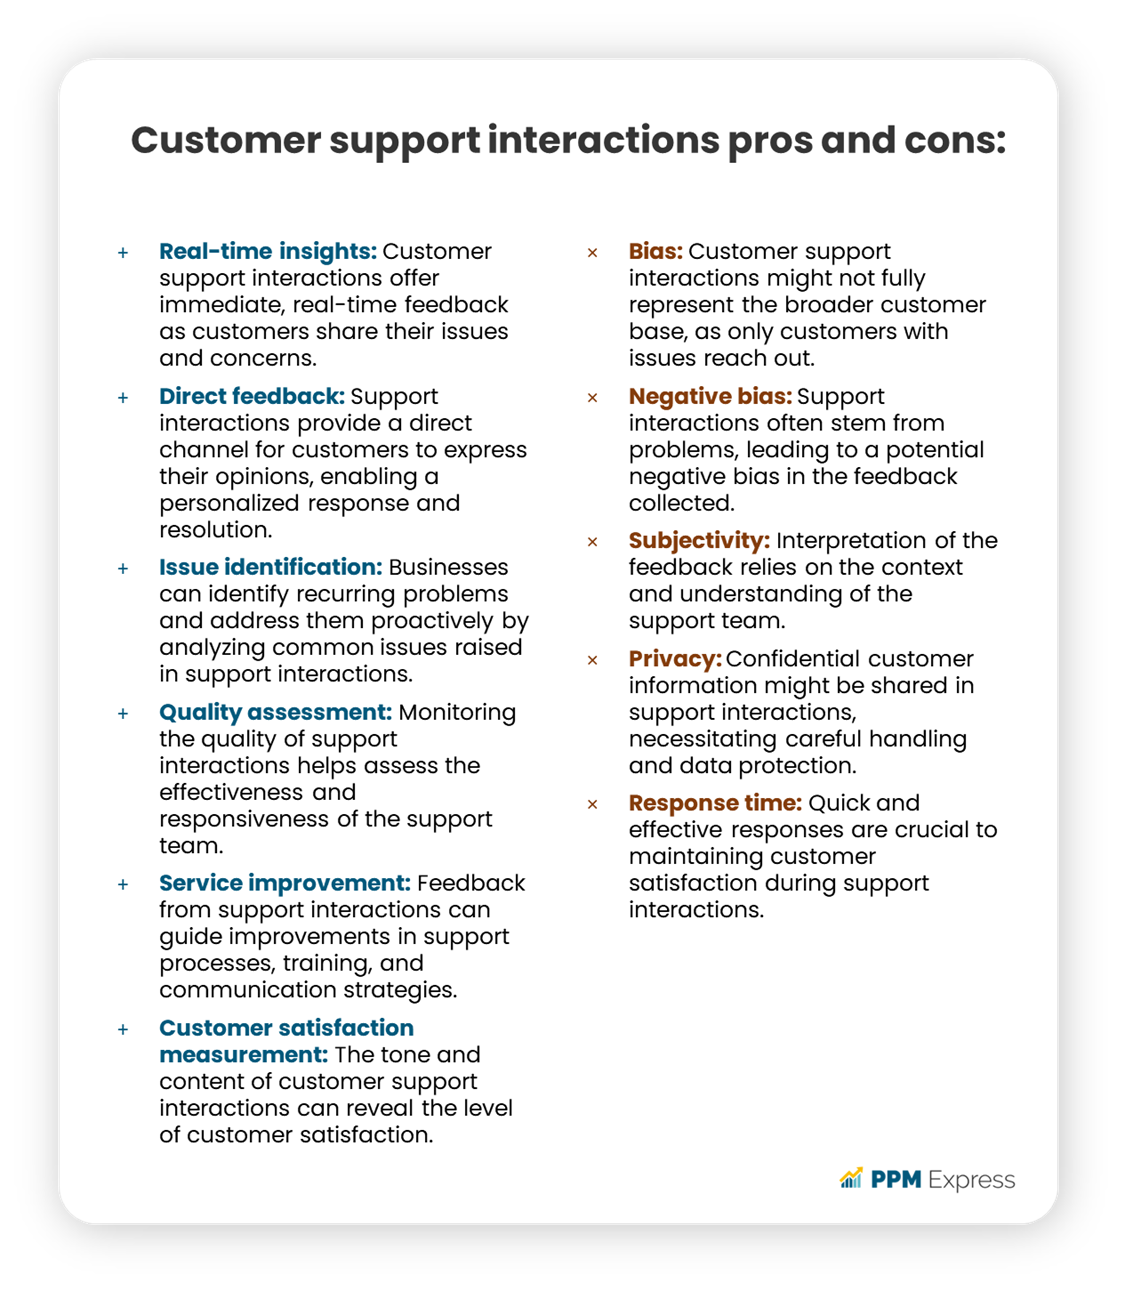 Customer support interactions pros and cons in collecting customer feedback